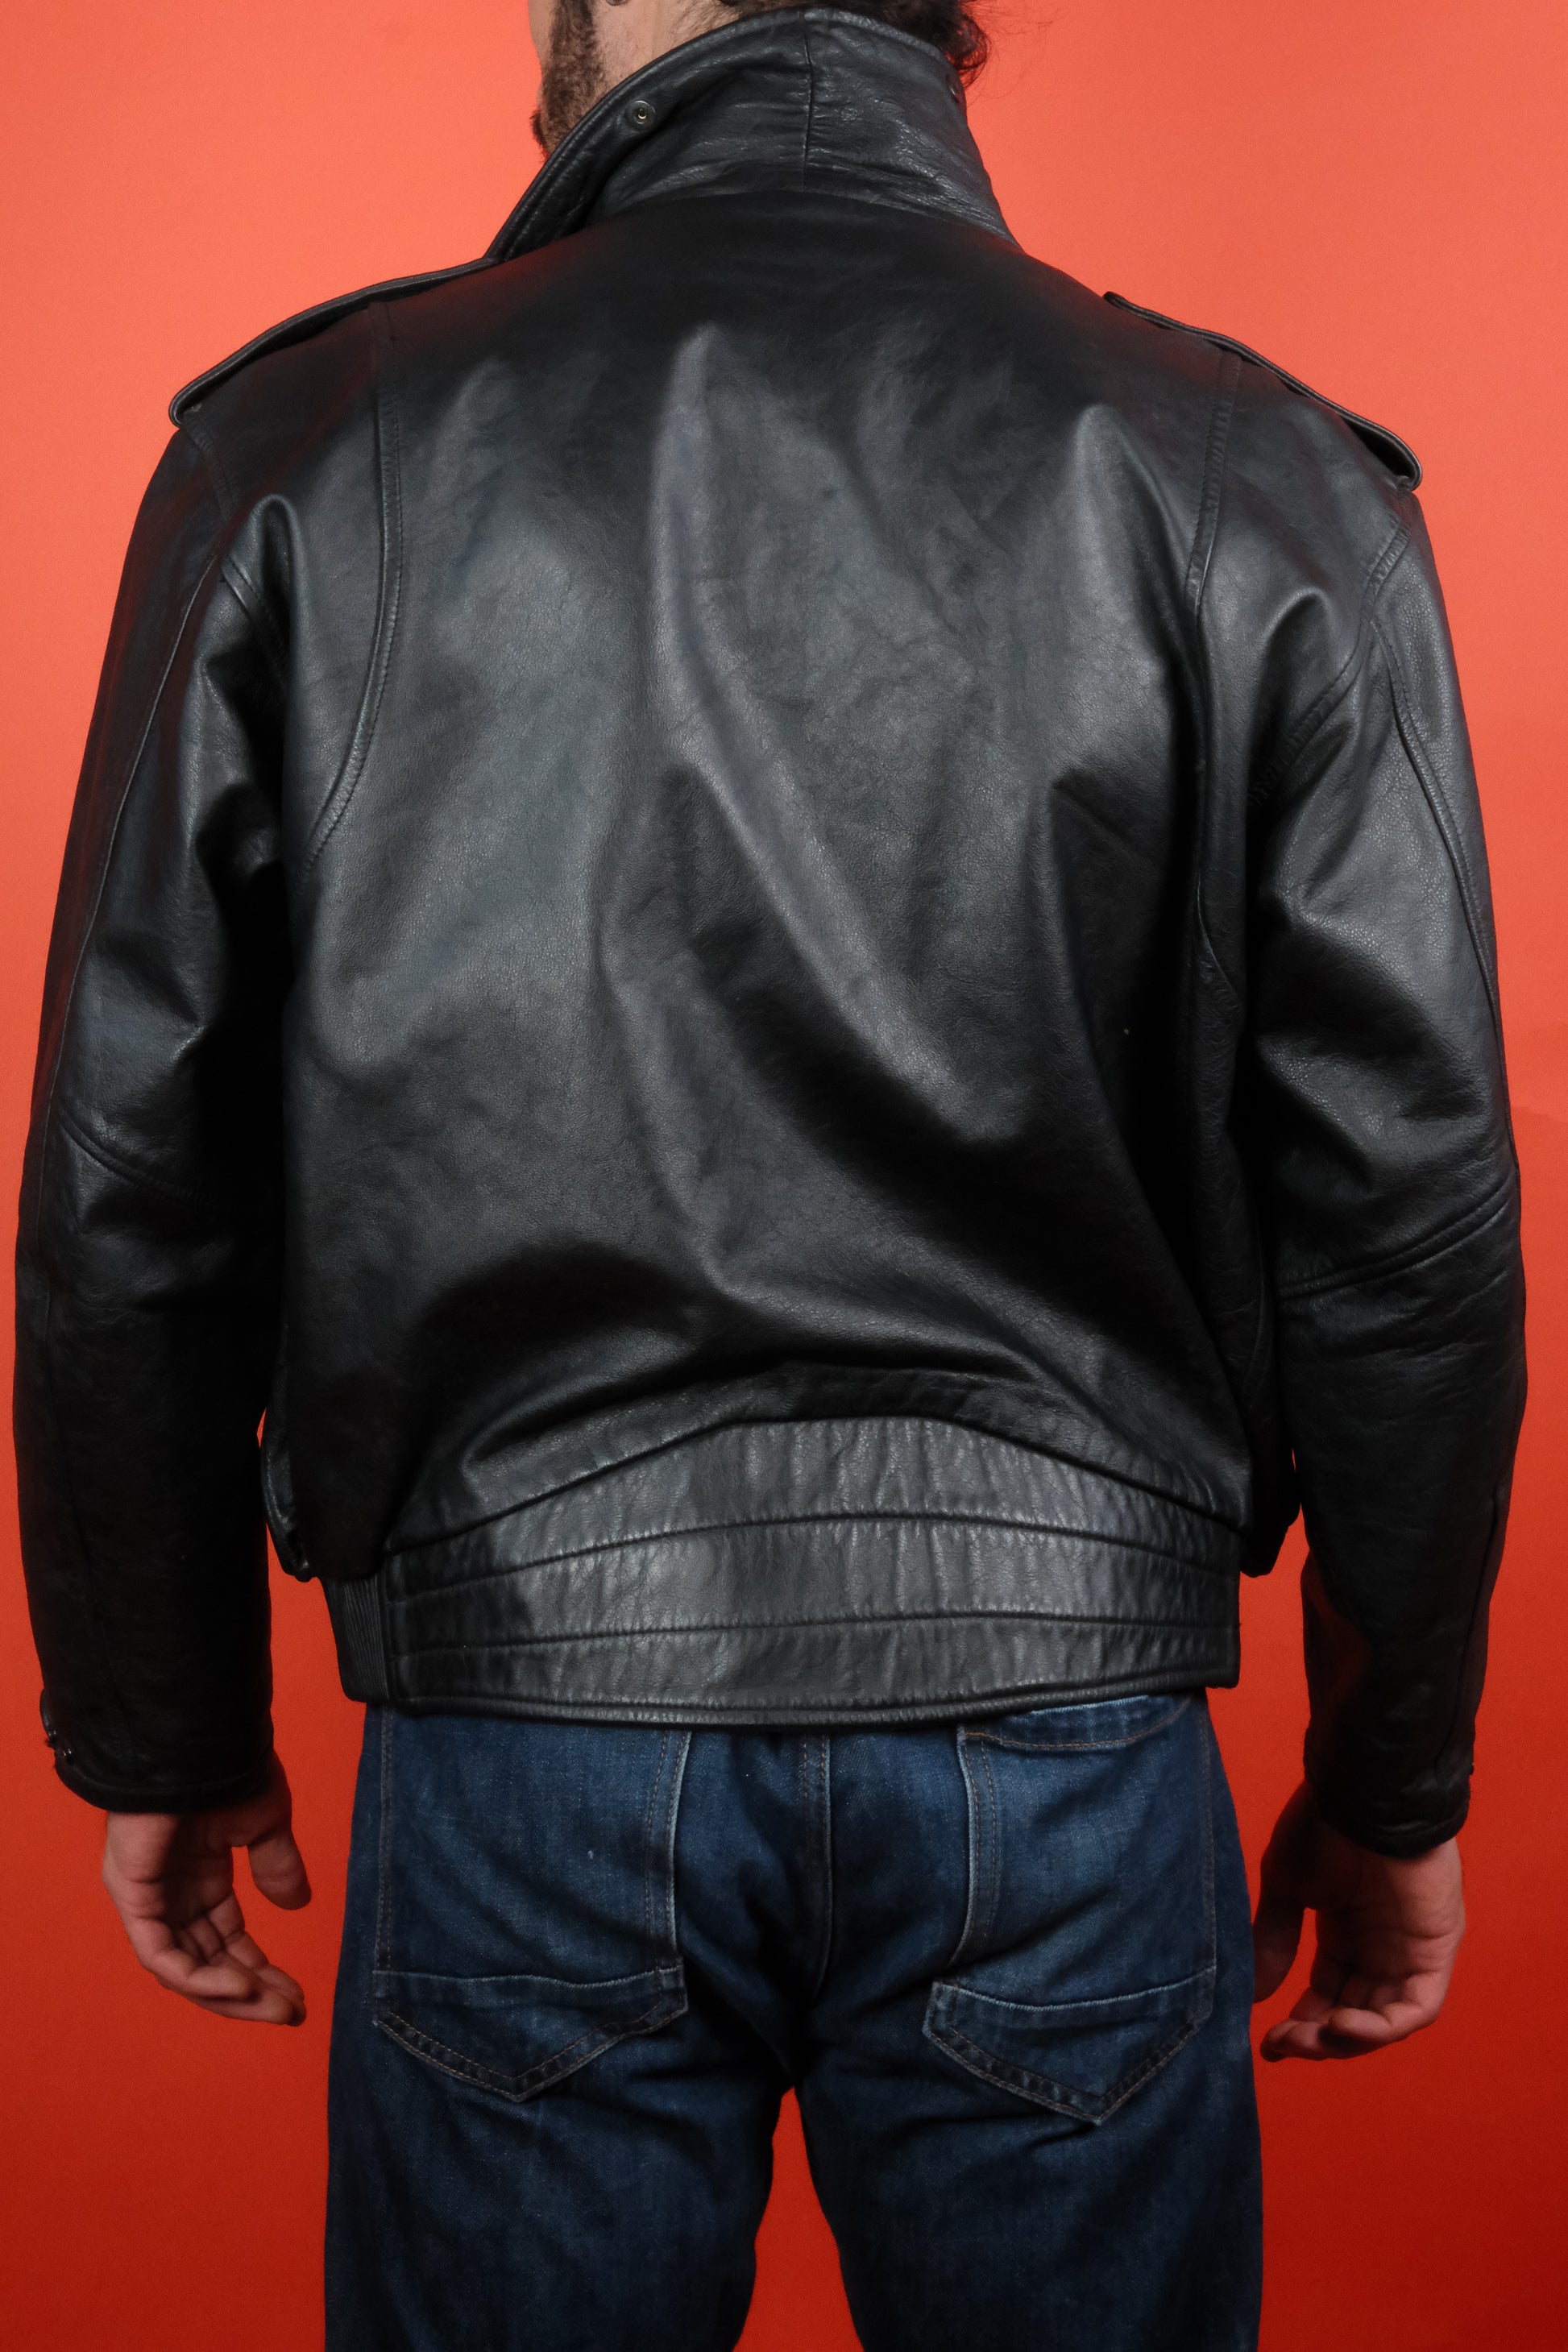 Leather Jacket Type A-2 Made in Italy 'M' - vintage clothing clochard92.com